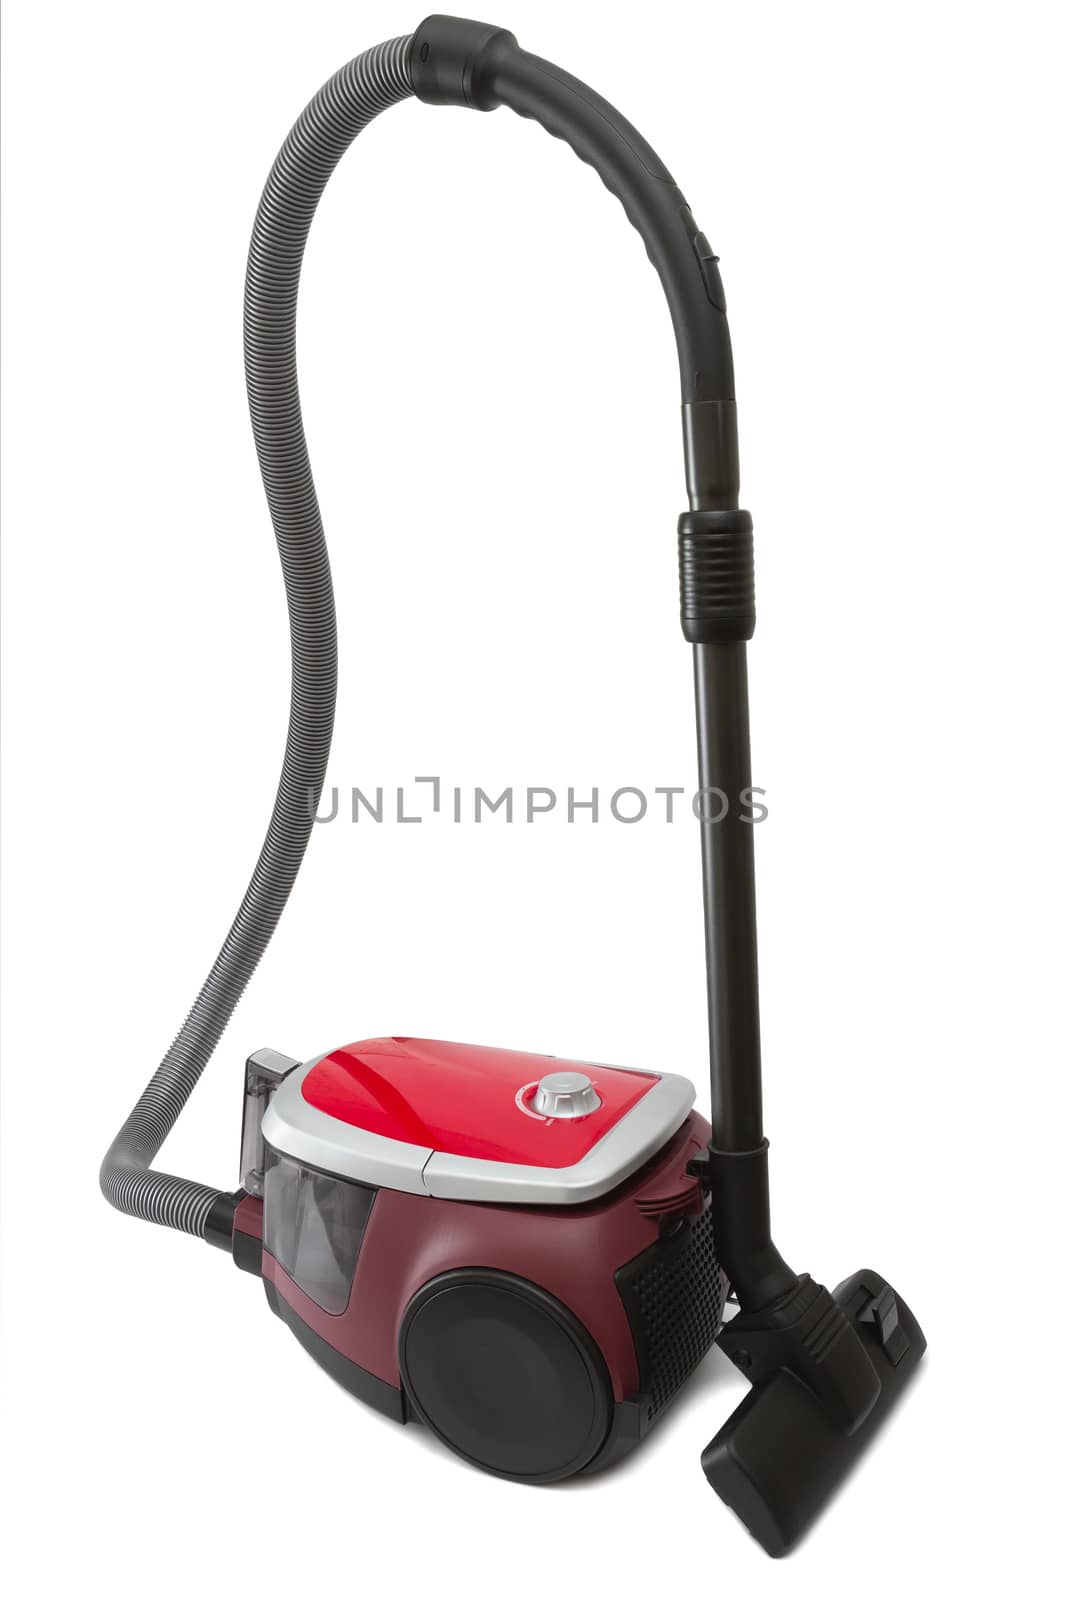 Vacuum cleaner by Ohotnik